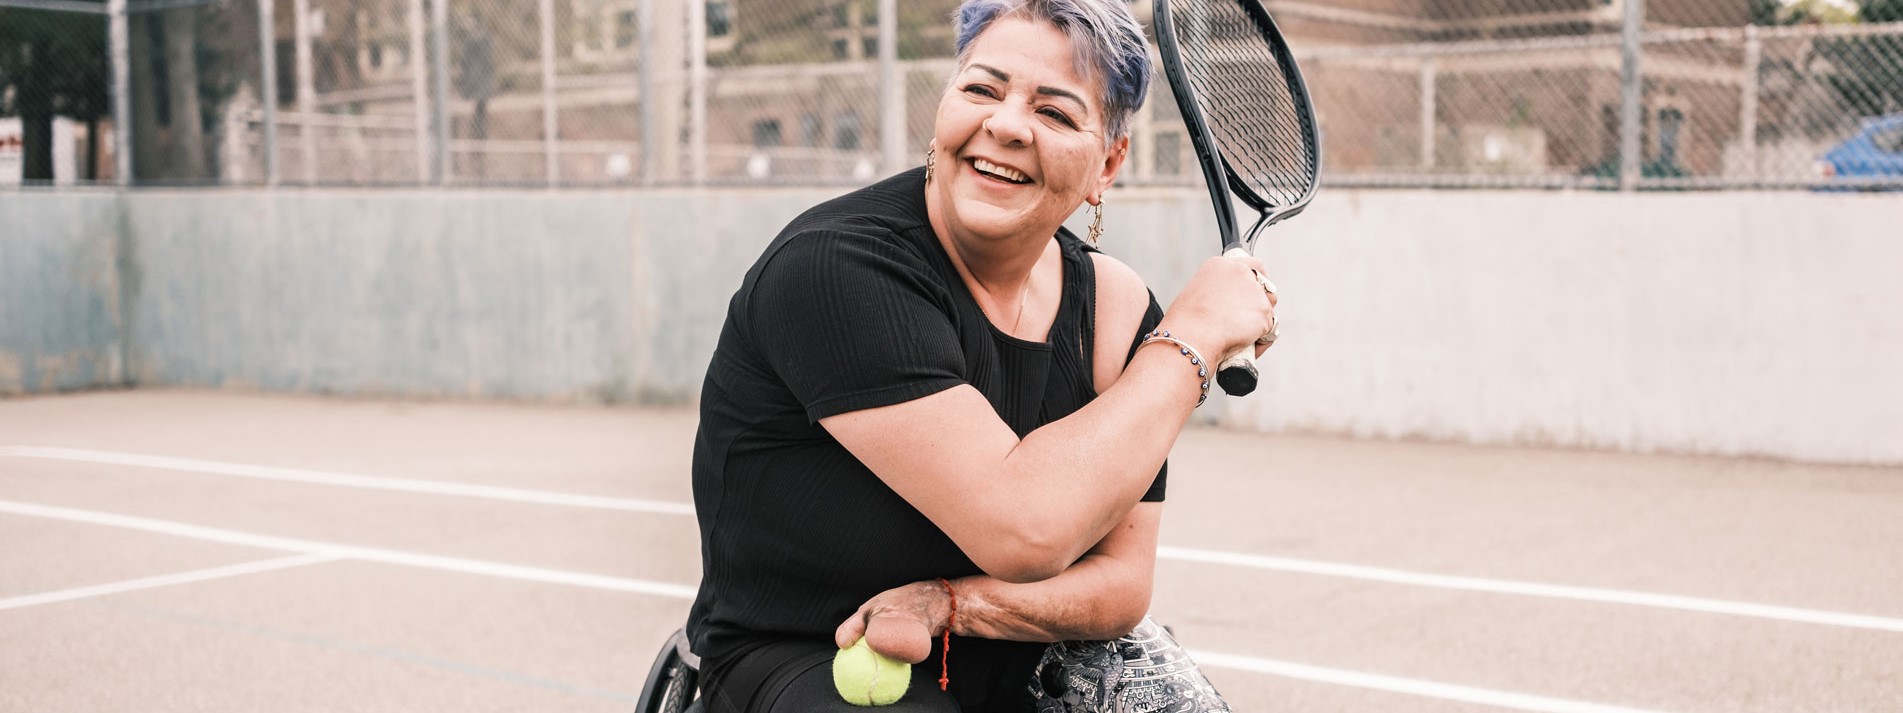 Disabled Latin Woman Practice Wheelchair Tennis Outdoors